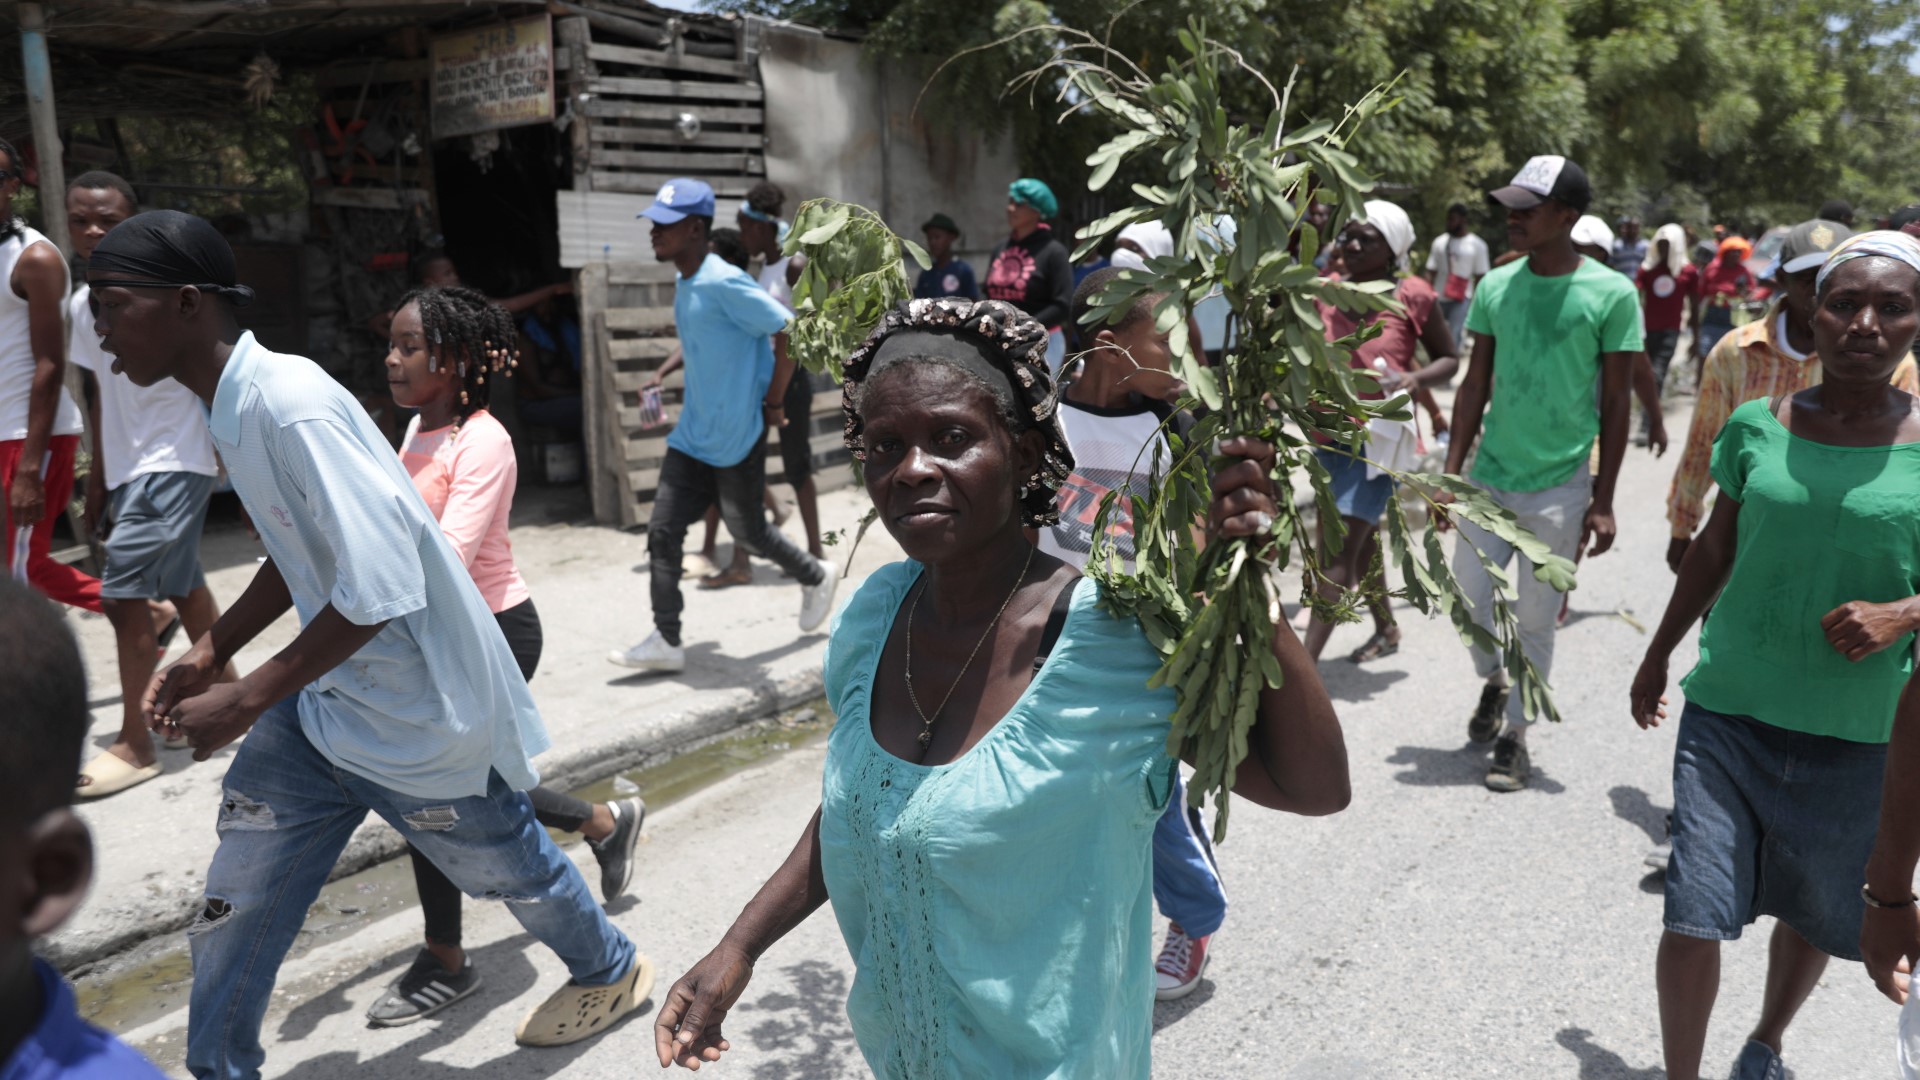 Dozens of people gathered in Haiti to denounce the kidnapping of American nurse Alix Dorsainvil by armed gunmen.